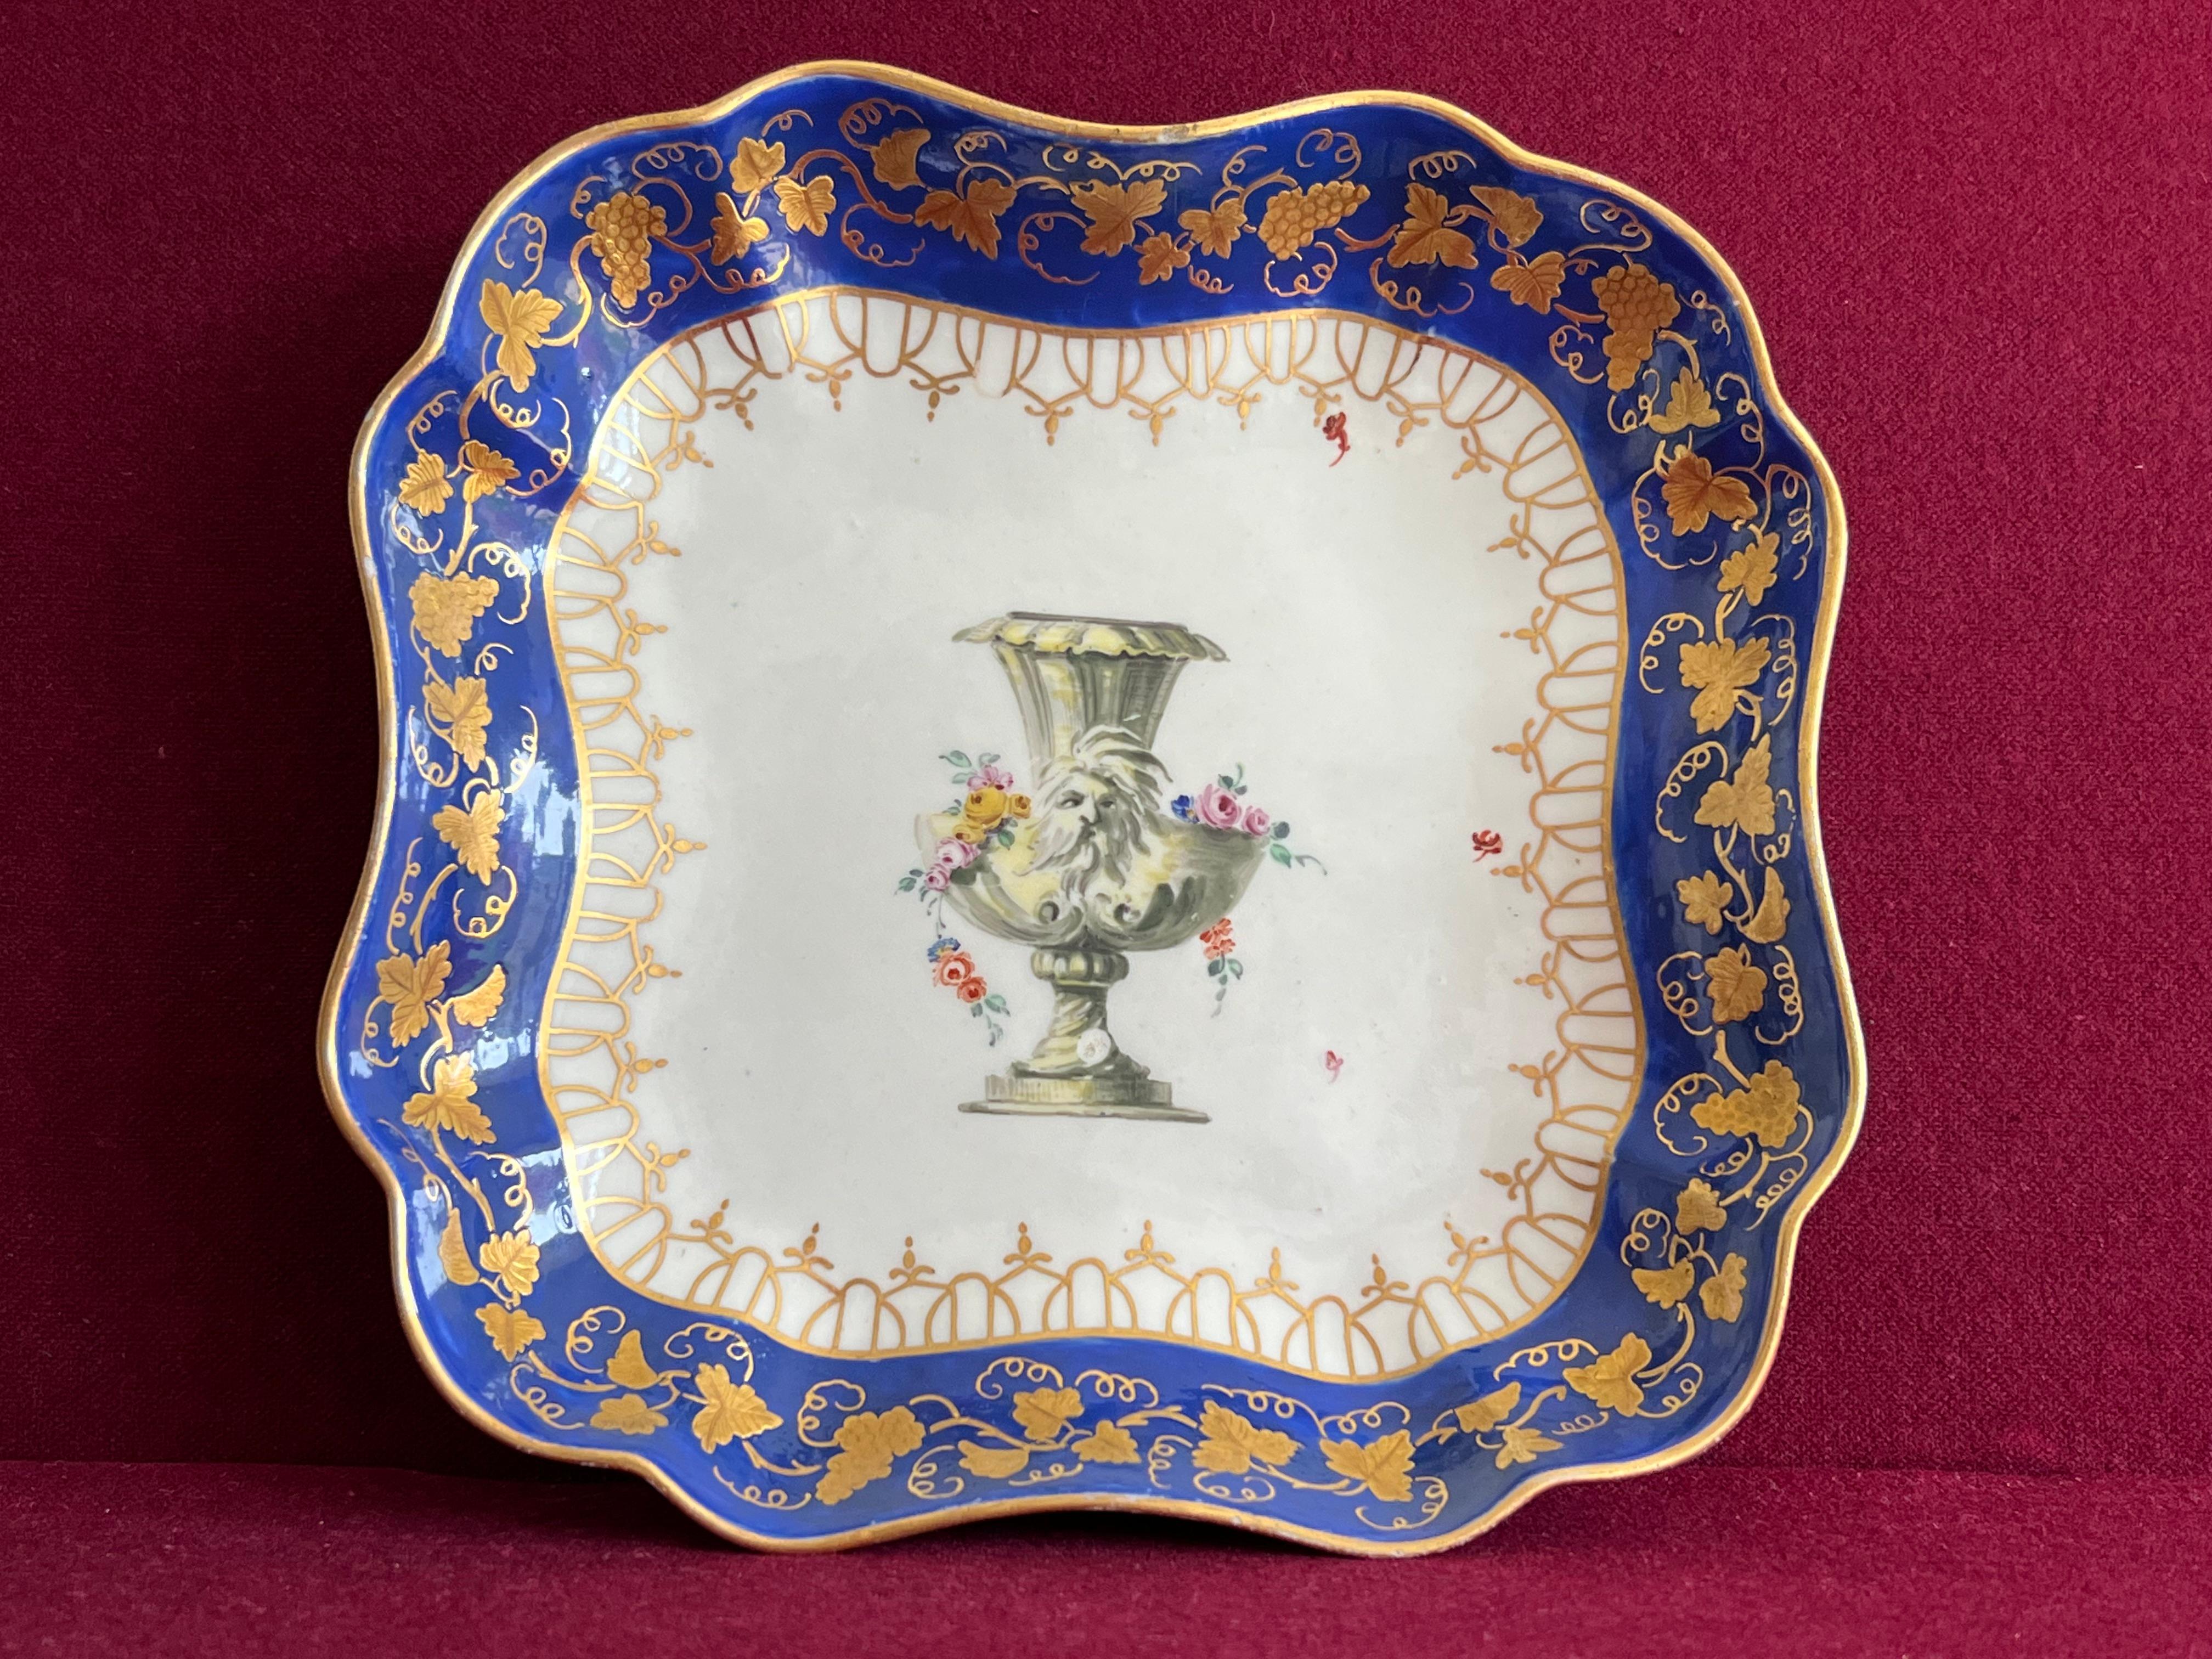 Hand-Painted Worcester Porcelain James Giles Studio Decorated Dish, C.1770